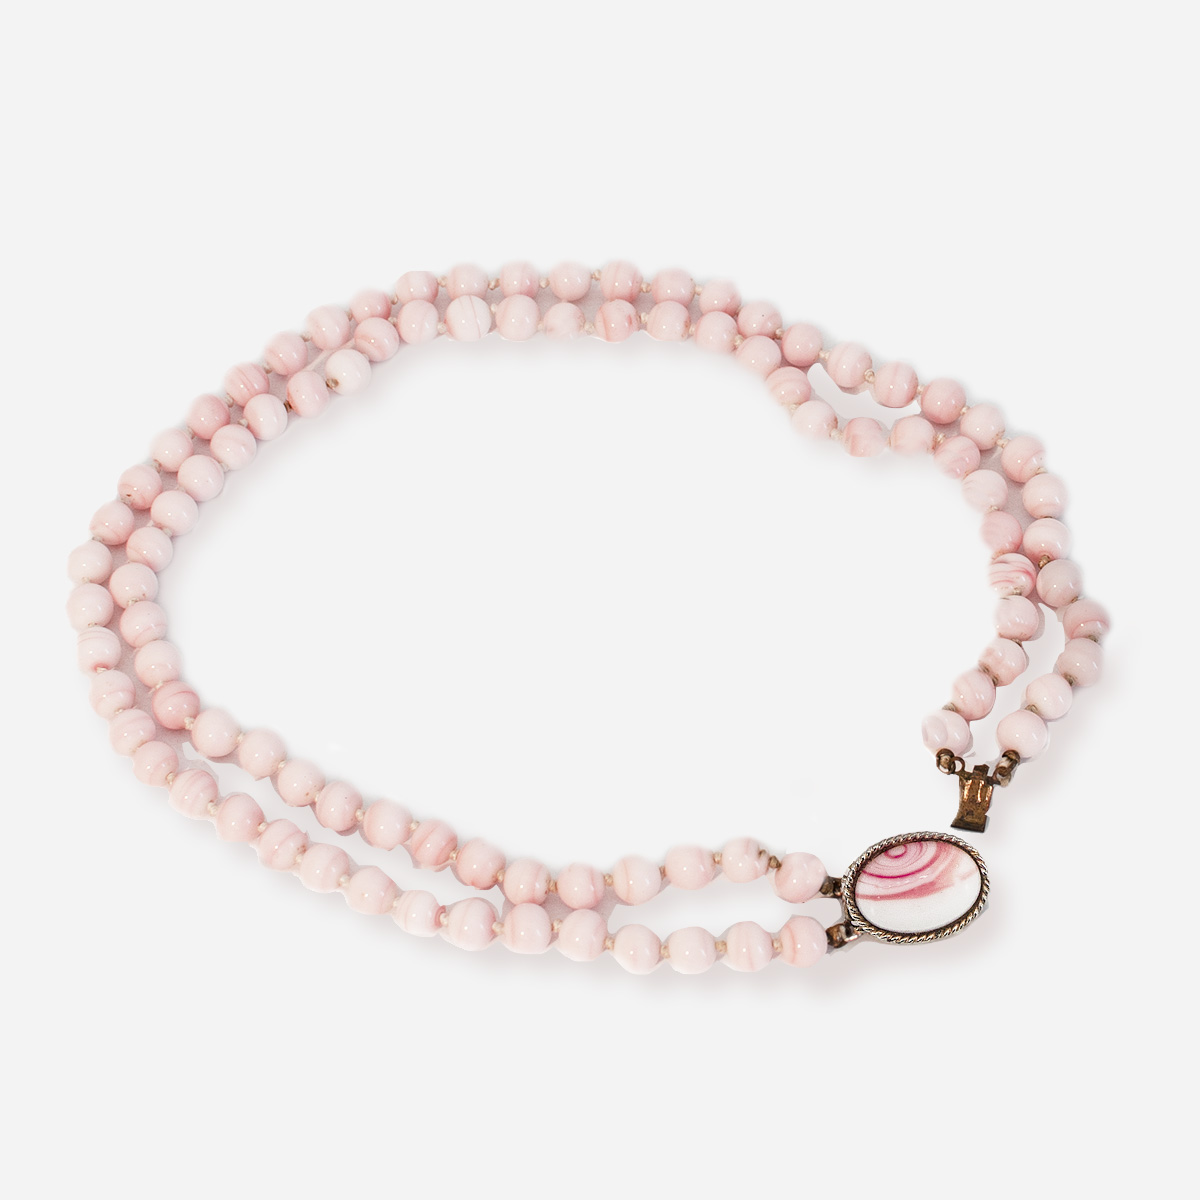 pink glass bead necklace